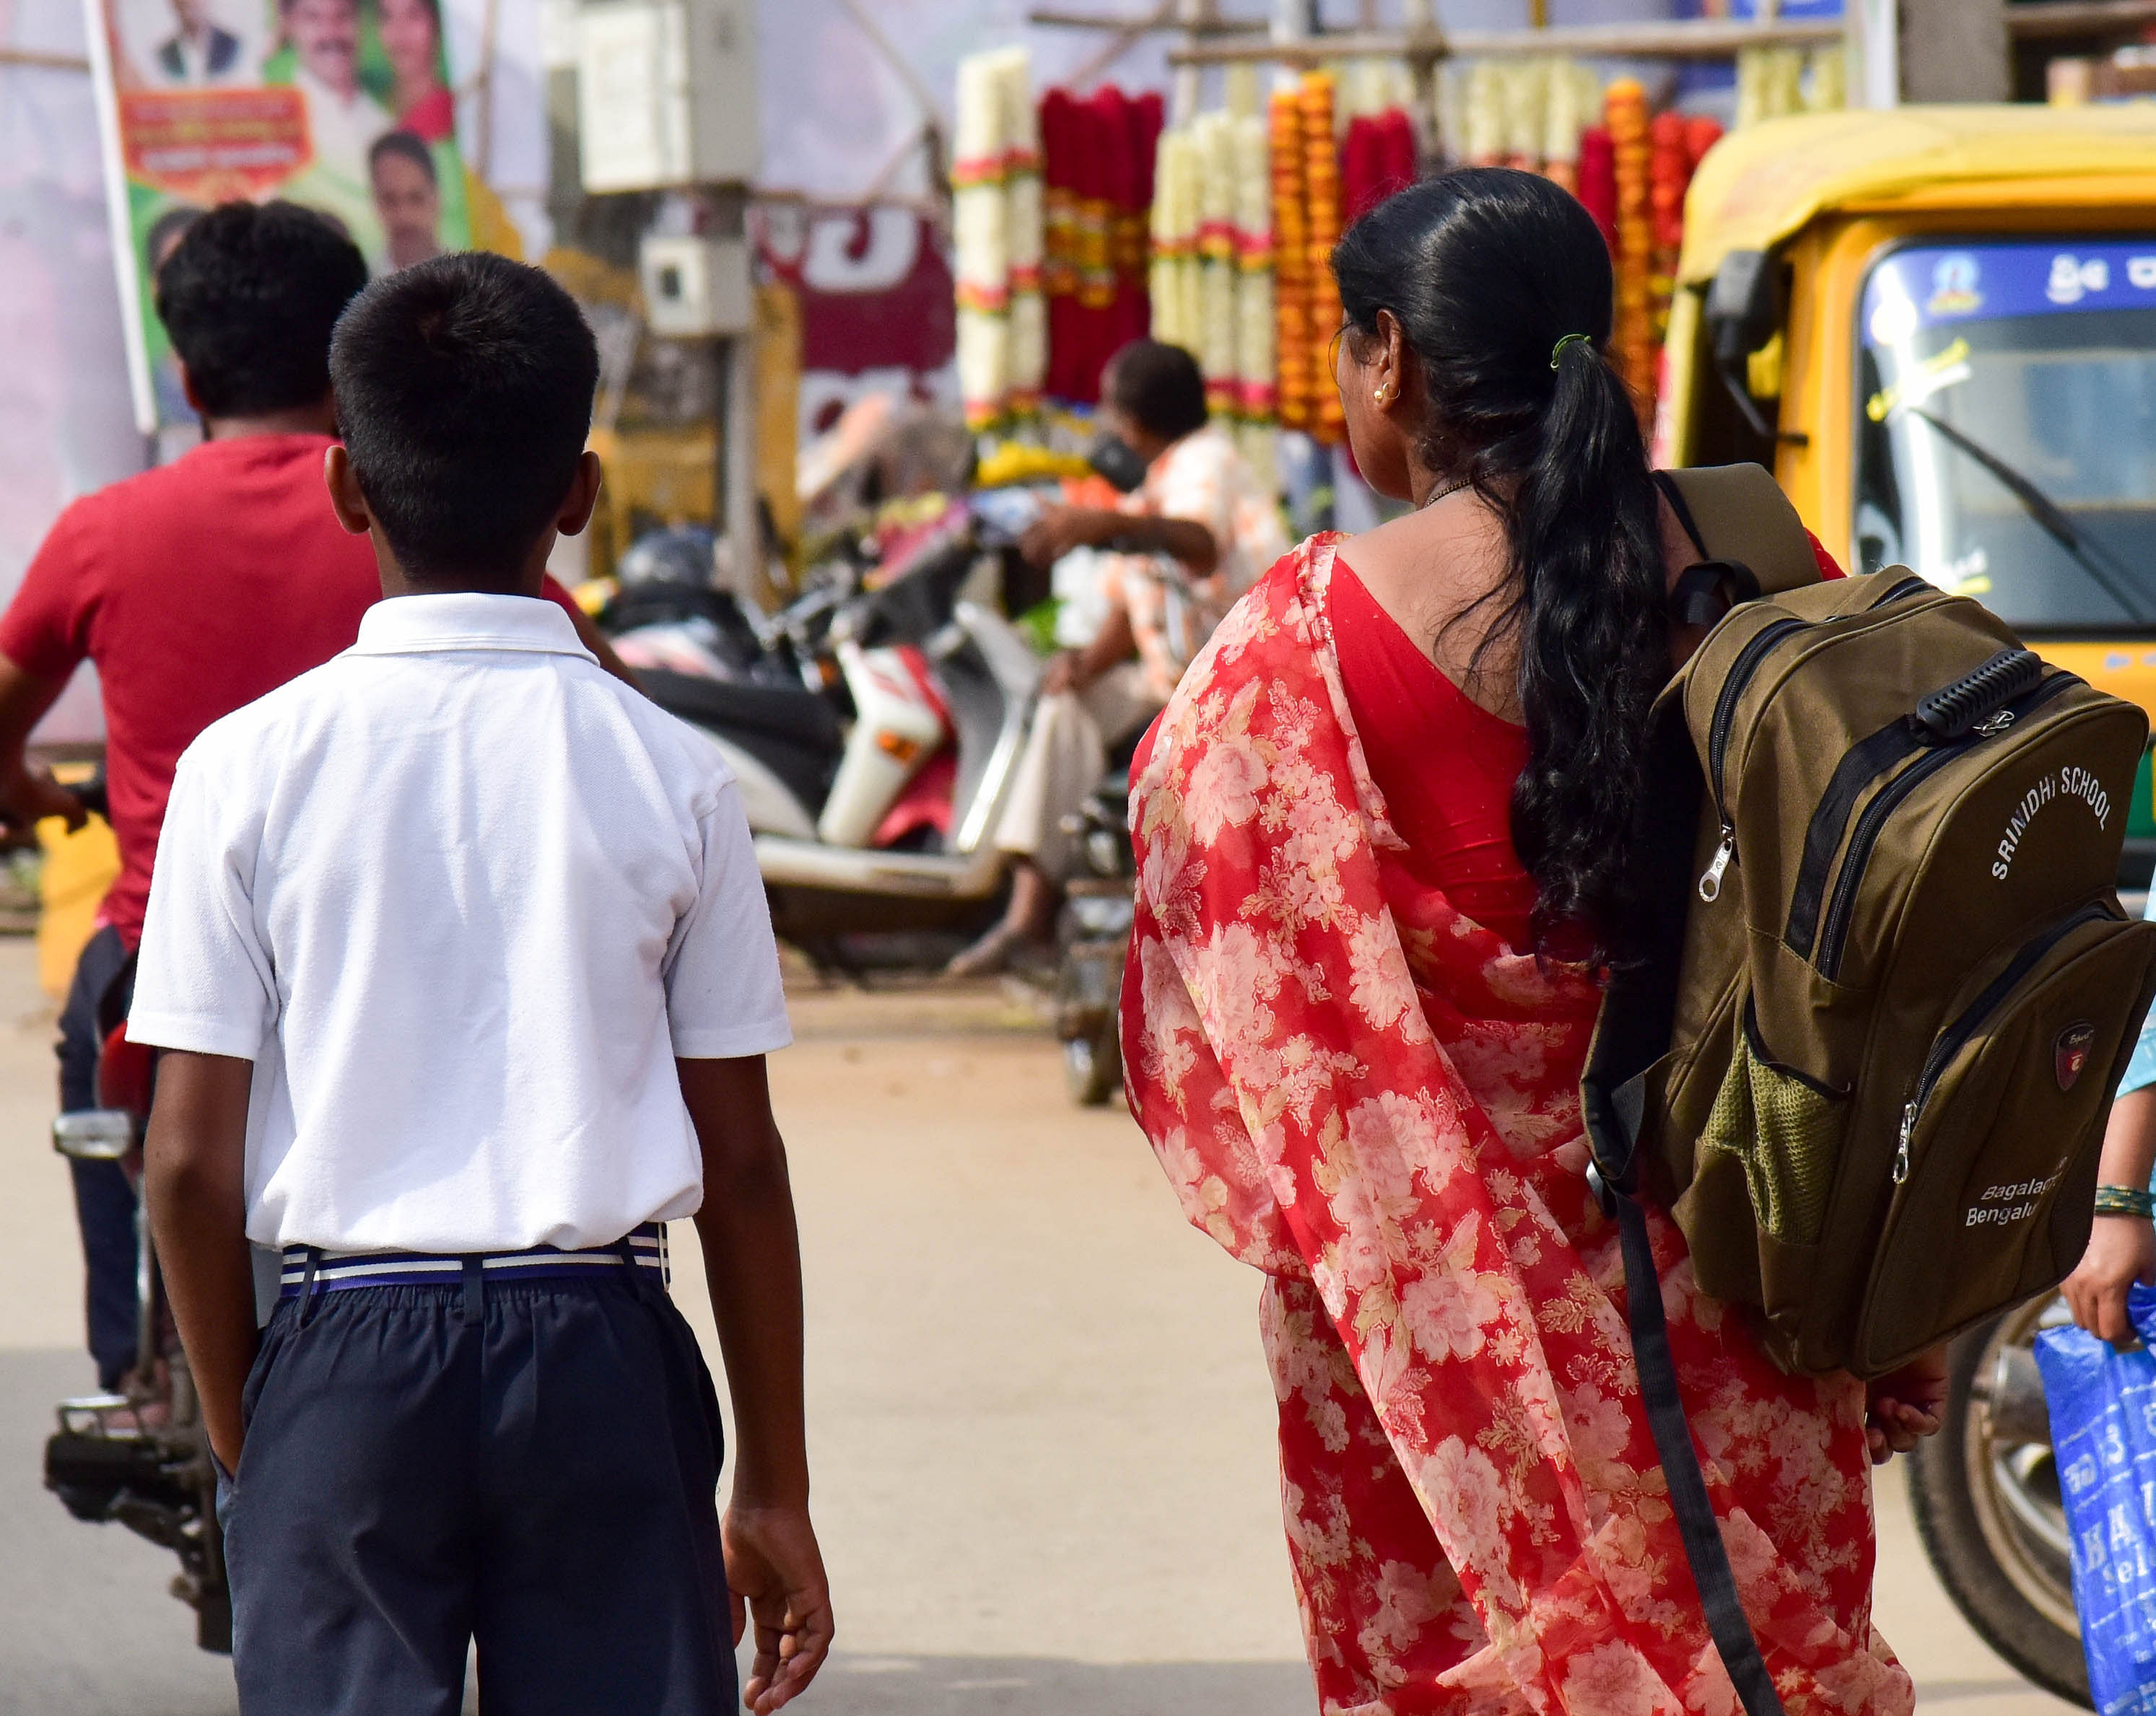 Heavy school bags alter the posture of the child and impact long-term health, doctors say. DH Photo by B H Shivakumar